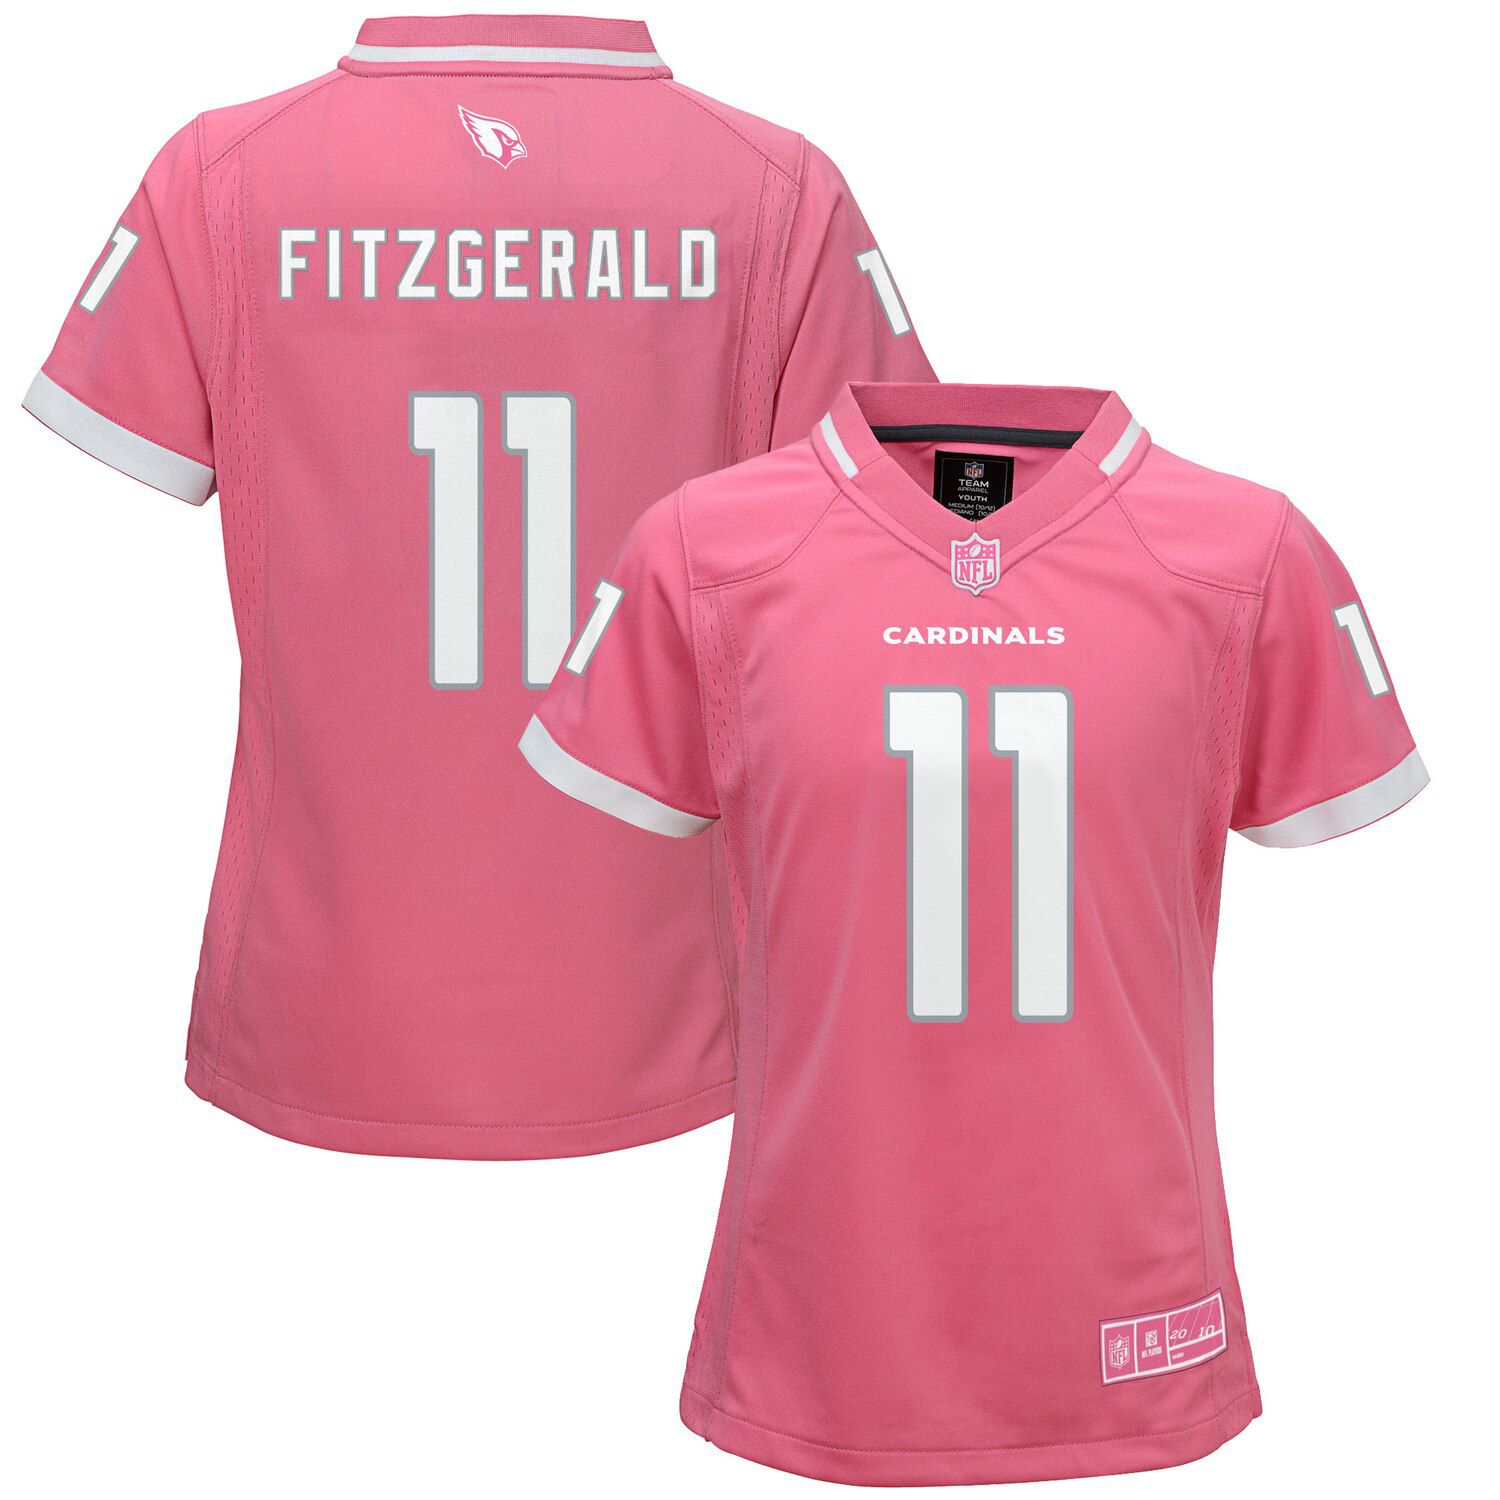 youth fitzgerald jersey